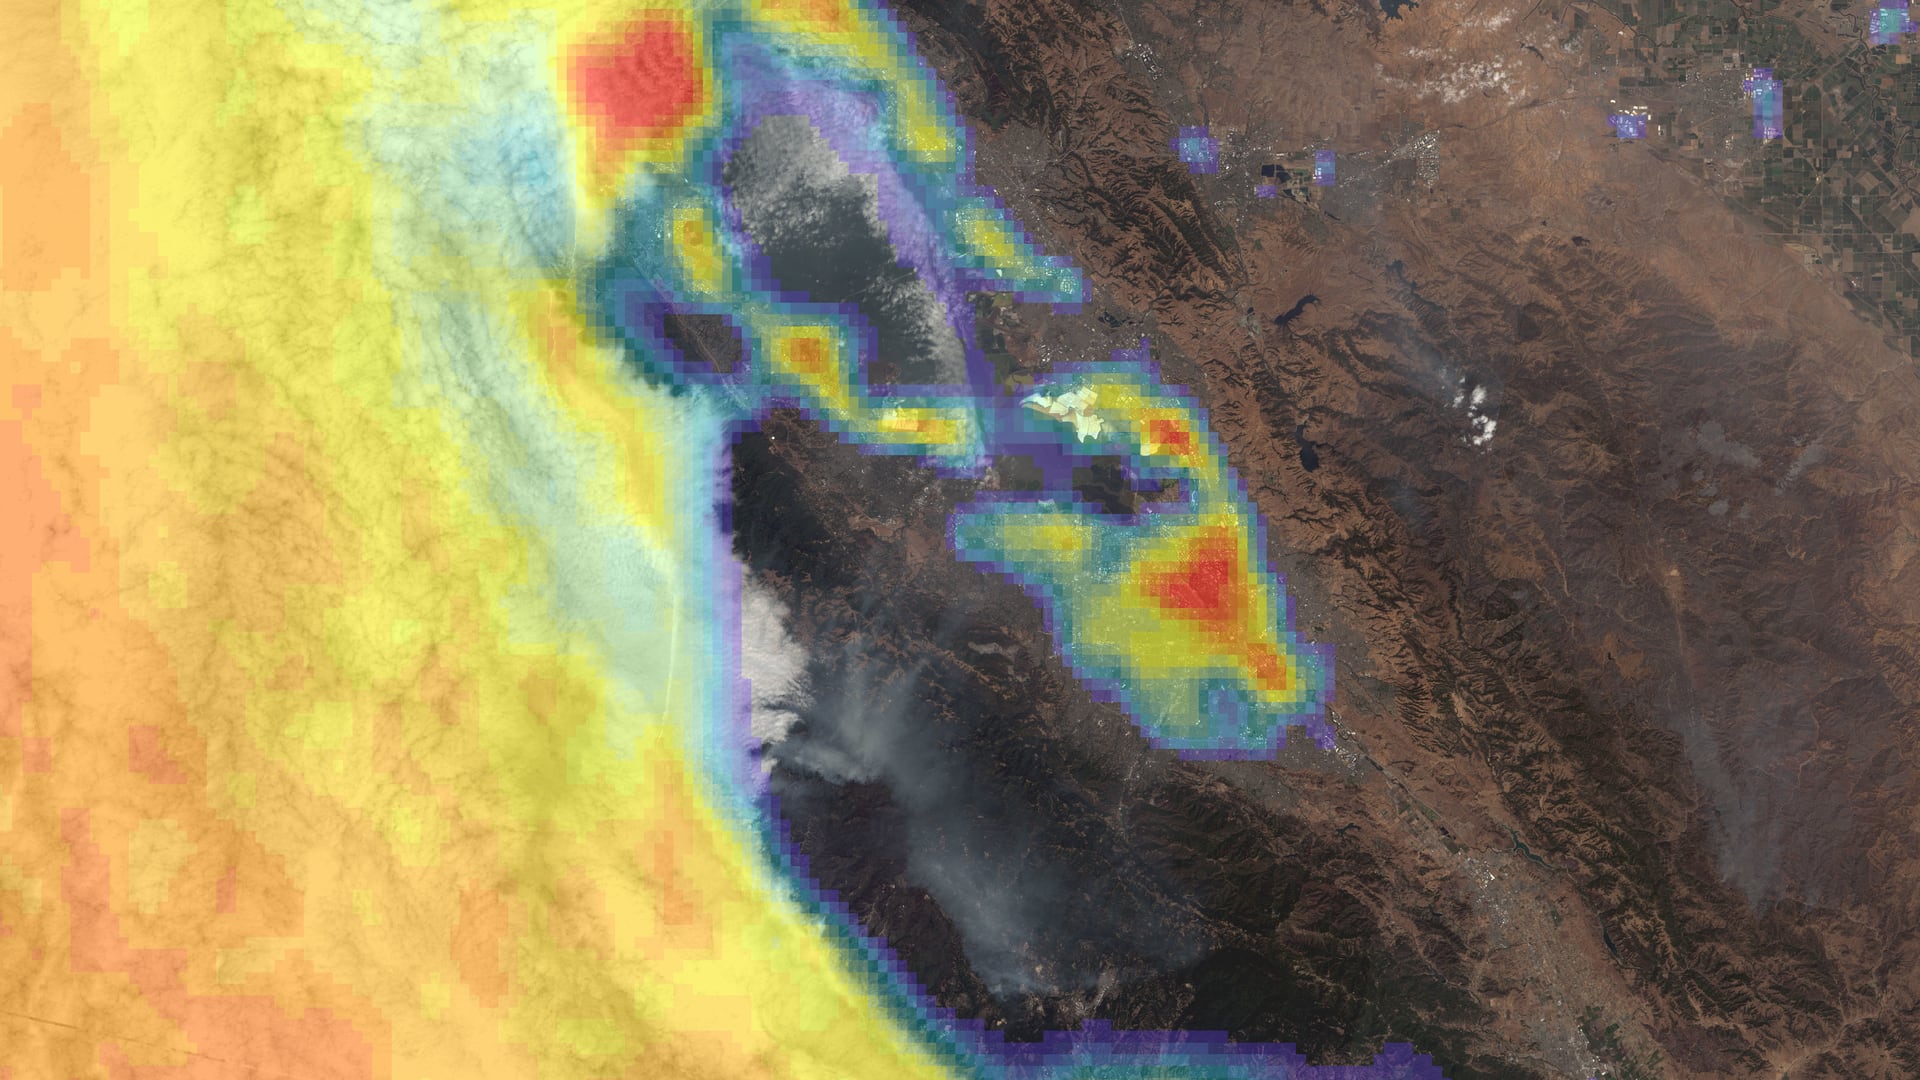 Presence of fog and low cloud cover in July 2020 derived from Terra MODIS data, overlaid on a true color Landsat 8 OLI image of San Francisco Bay, California taken August 2020. Bright red shades represent higher fog frequency, up to 29 days per month, while blue and transparent indicate fewer than 8 days. The presence of fog is vital for coast redwood trees and projecting future fog presence can support redwood habitat conservation efforts.   Keywords: MODIS, fog, cloud, climate change, coast redwood (Sequoia sempervirens), San Francisco Bay, California